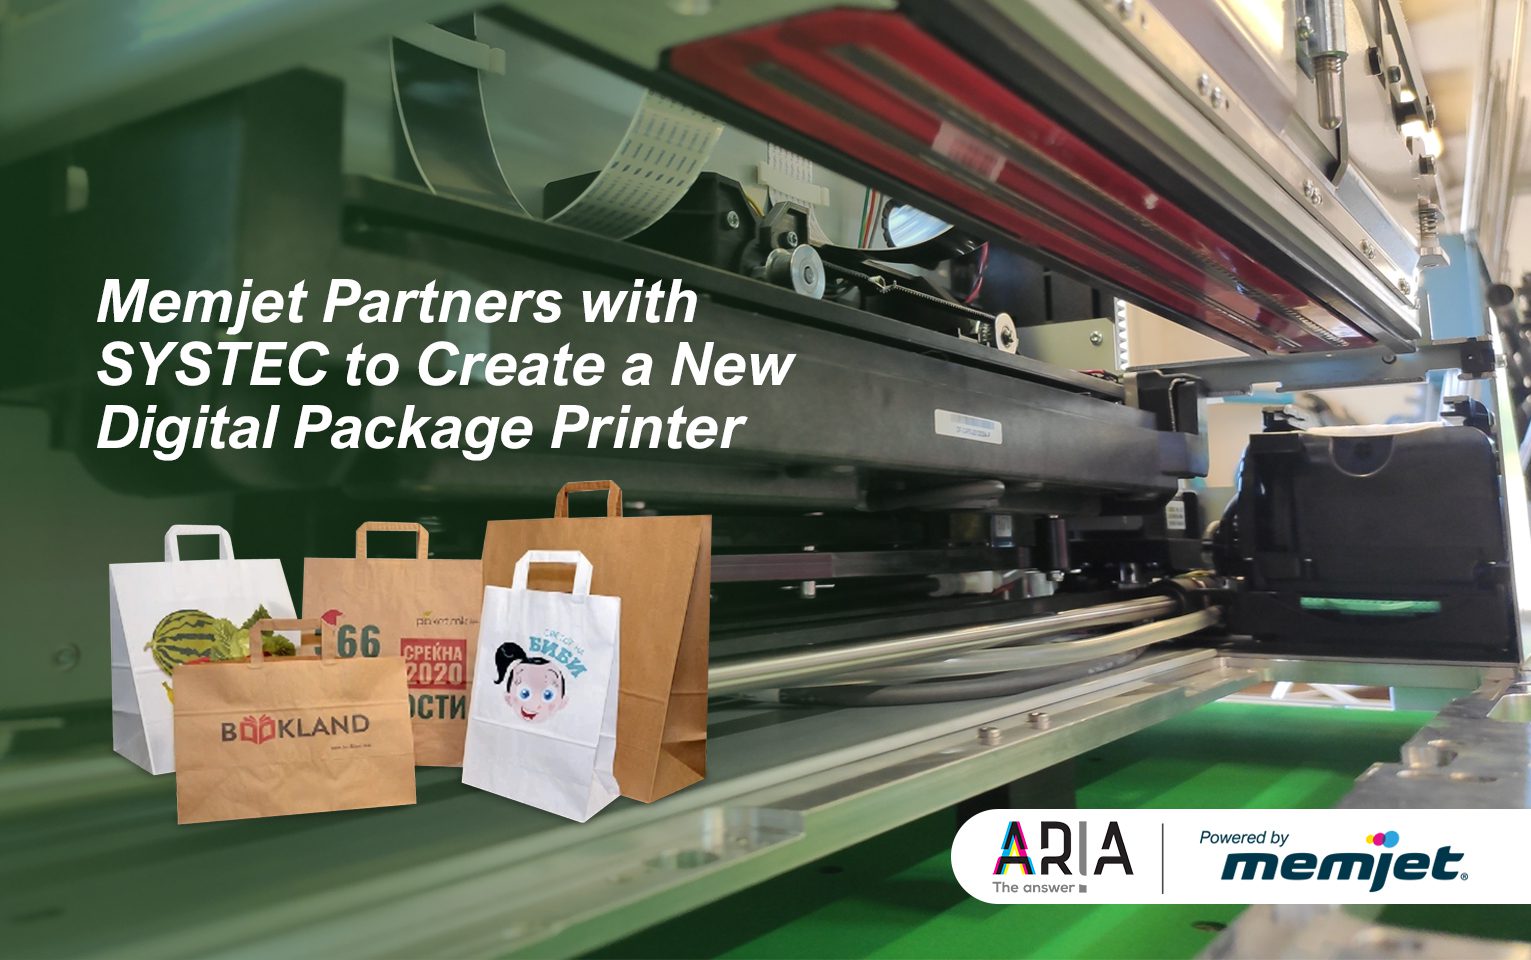 Memjet Partners with SYSTEC to Create a New Digital Package Printer